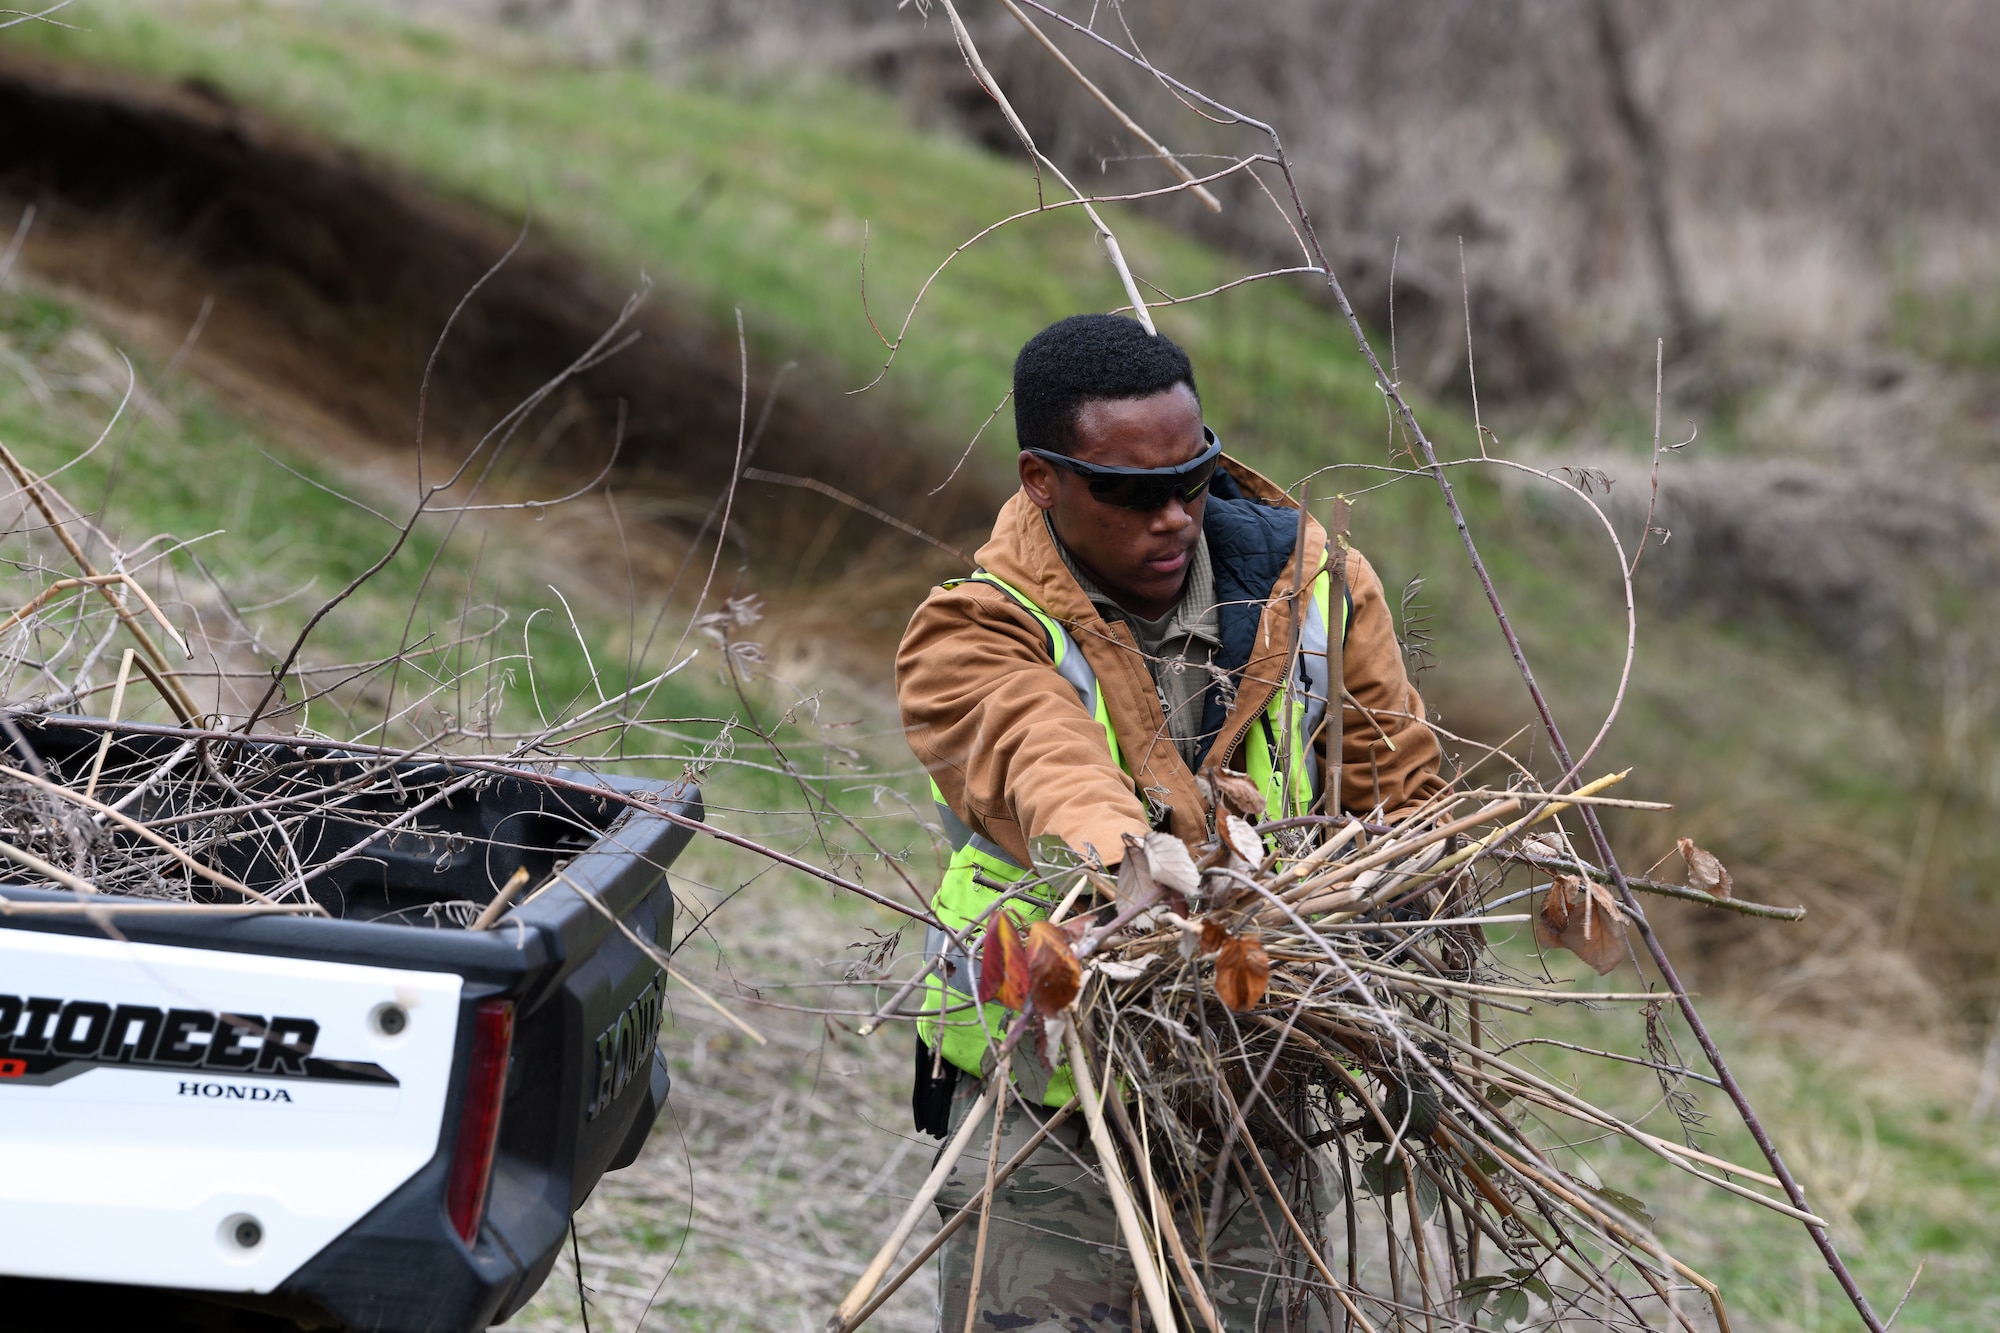 Senior Airman Diante Townsend, 9th Civil Engineering Squadron pavement and construction equipment specialist, loads an all-terrain vehicle with young trees that were cut down, Jan. 8, 2020, at Beale Air Force Base, California. The trees were cut down as a flood prevention effort. (U.S. Air Force photo by Airman 1st Class Luis A. Ruiz-Vazquez)